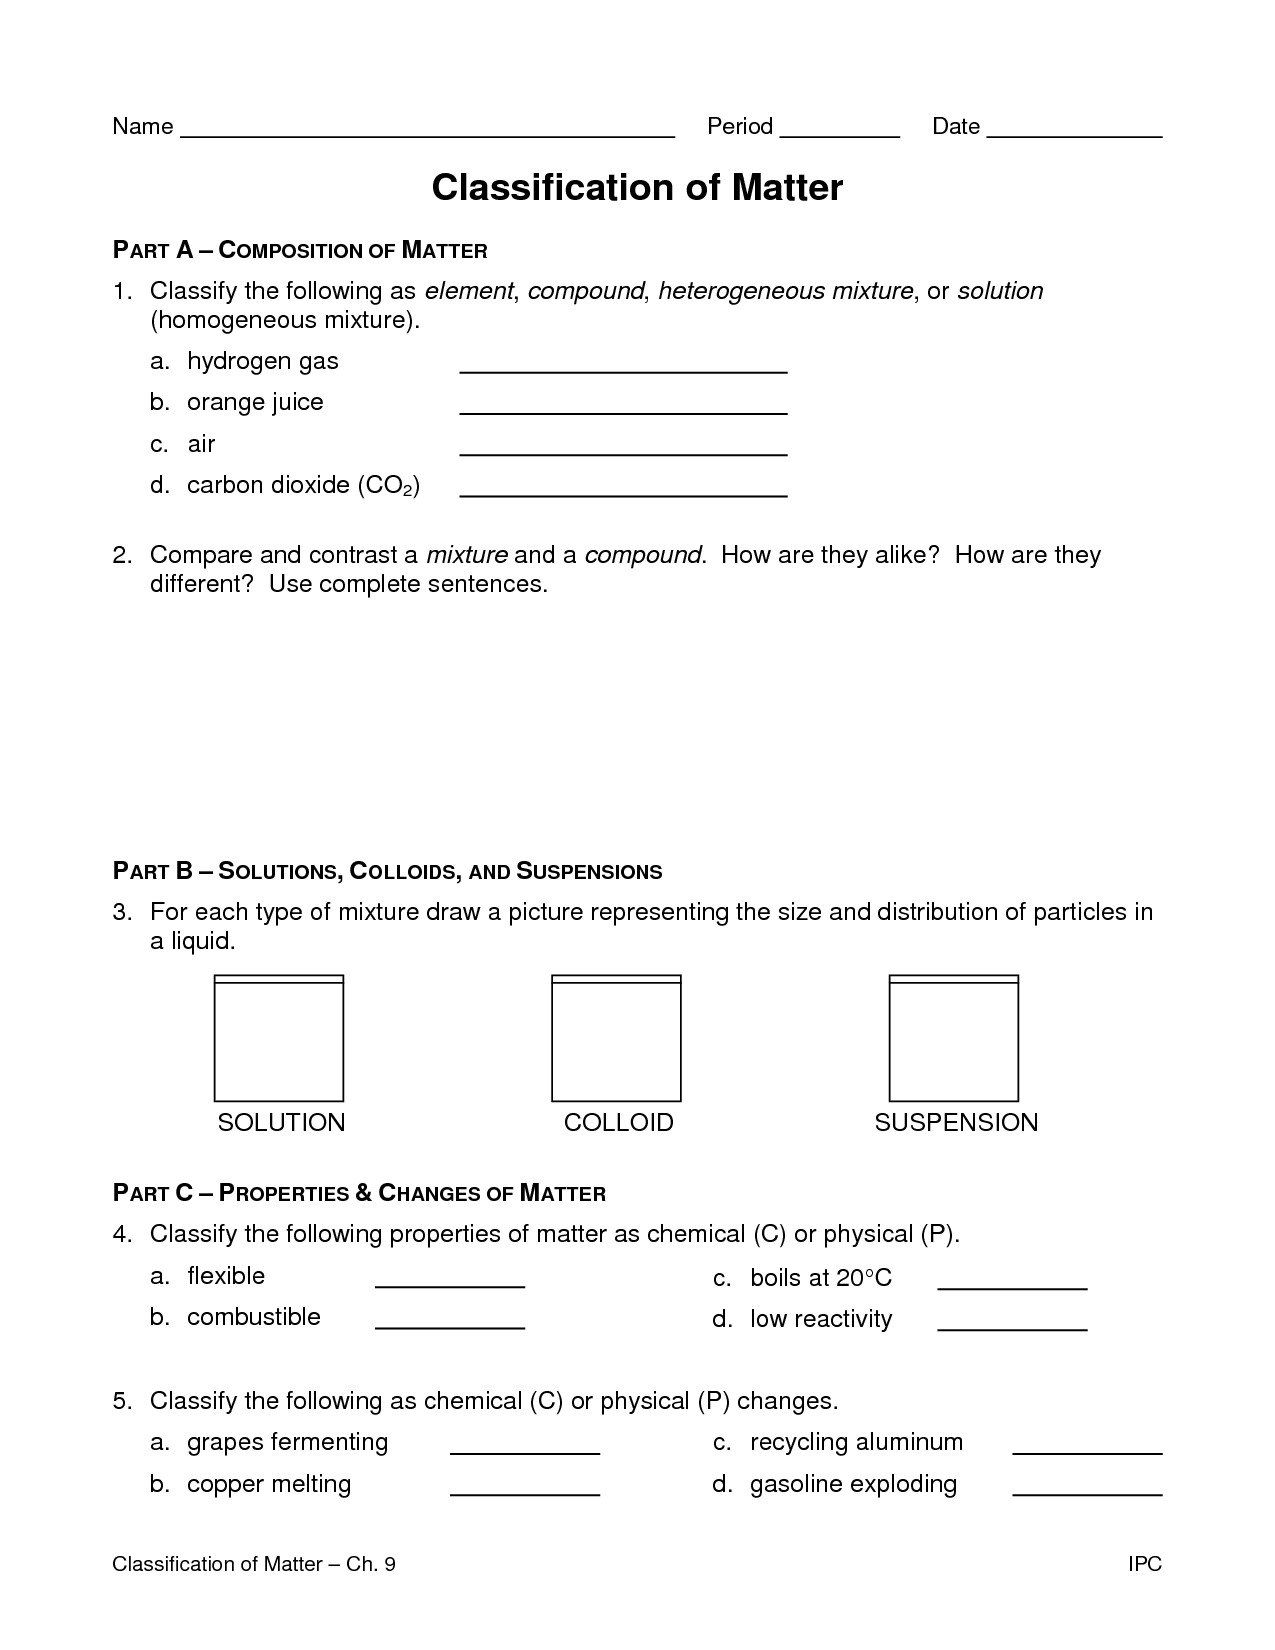 Chemistry 1 Worksheet Classification Of Matter And Changes